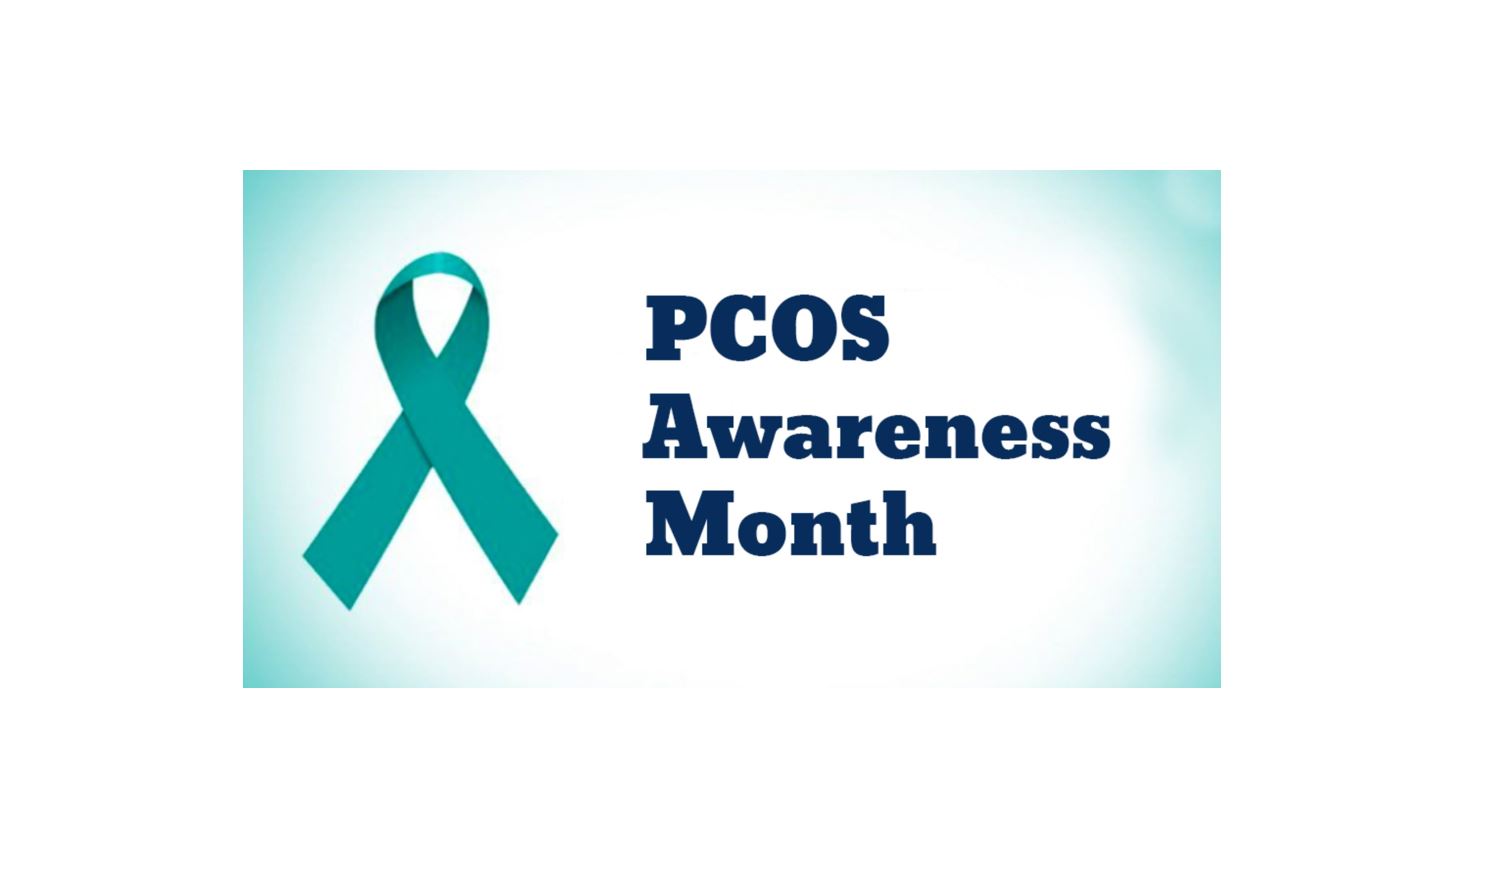 September is PCOS Awareness Month PCOS.Together